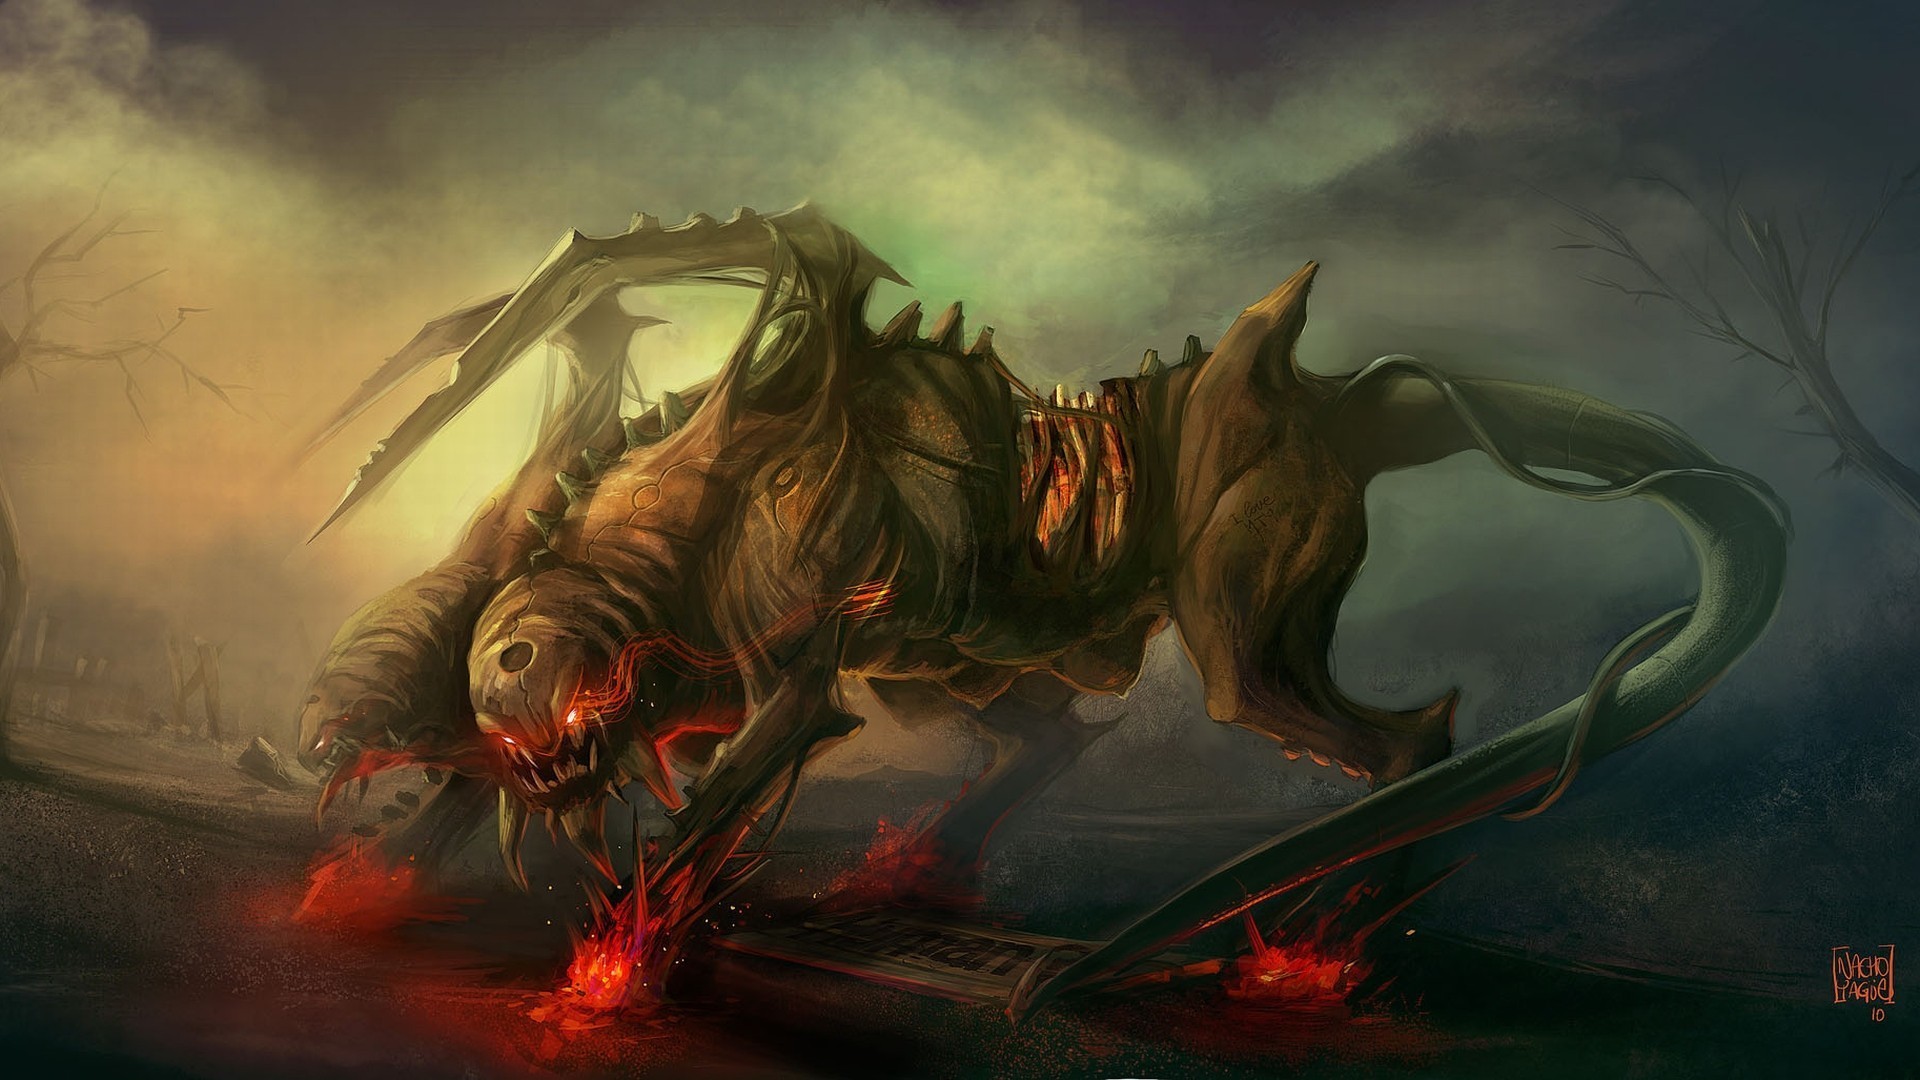 1920x1080  Fanyasy creatures | Fantasy creatures art horror background  wallpapers images Fantasy HD .